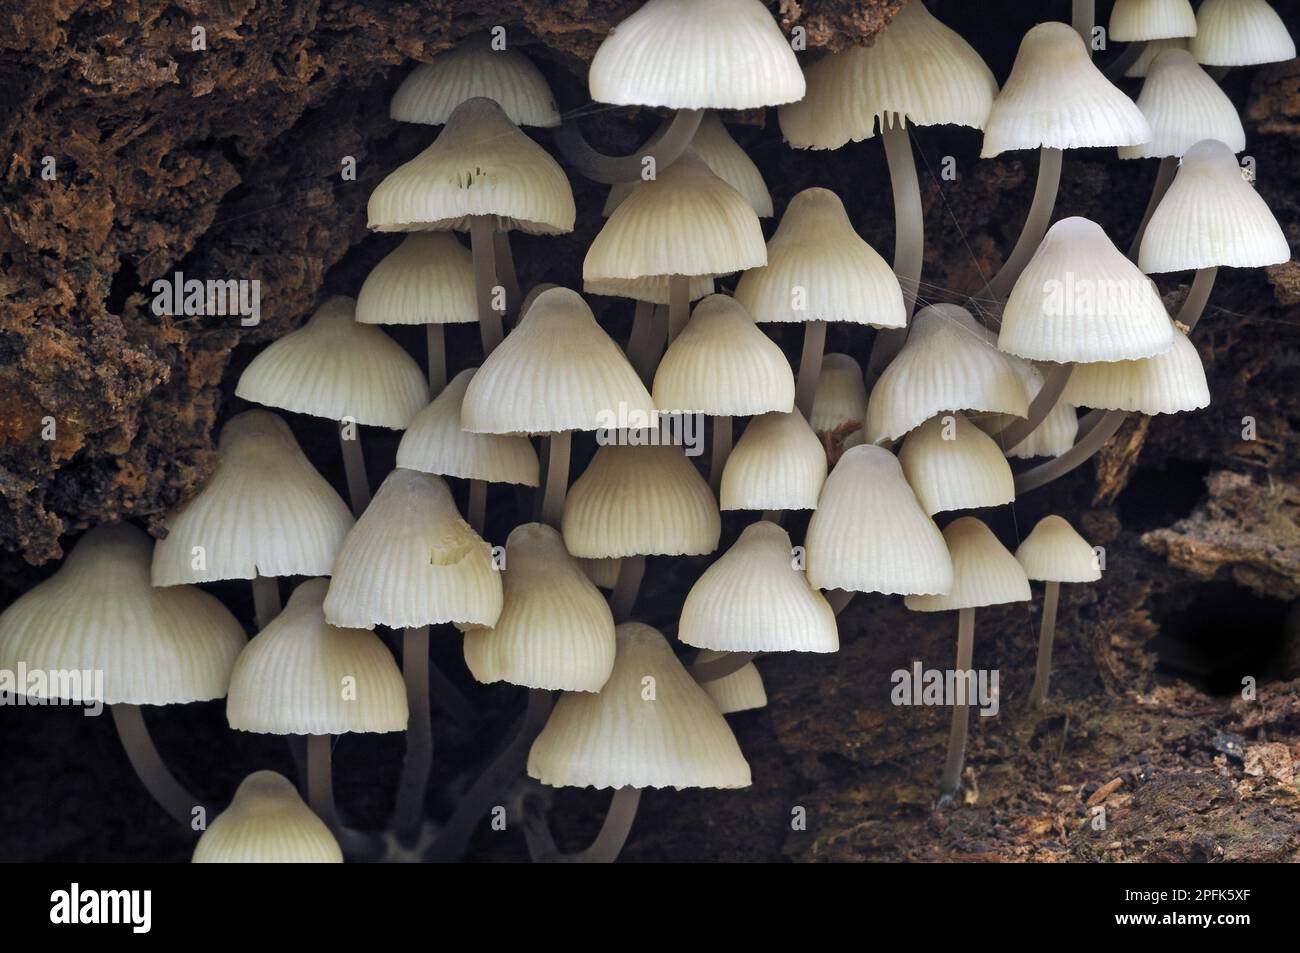 White Milking Bonnet (Mycena galopus var. candida) fruiting bodies, cluster growing in rotten tree hollow, Leicestershire, England, United Kingdom Stock Photo